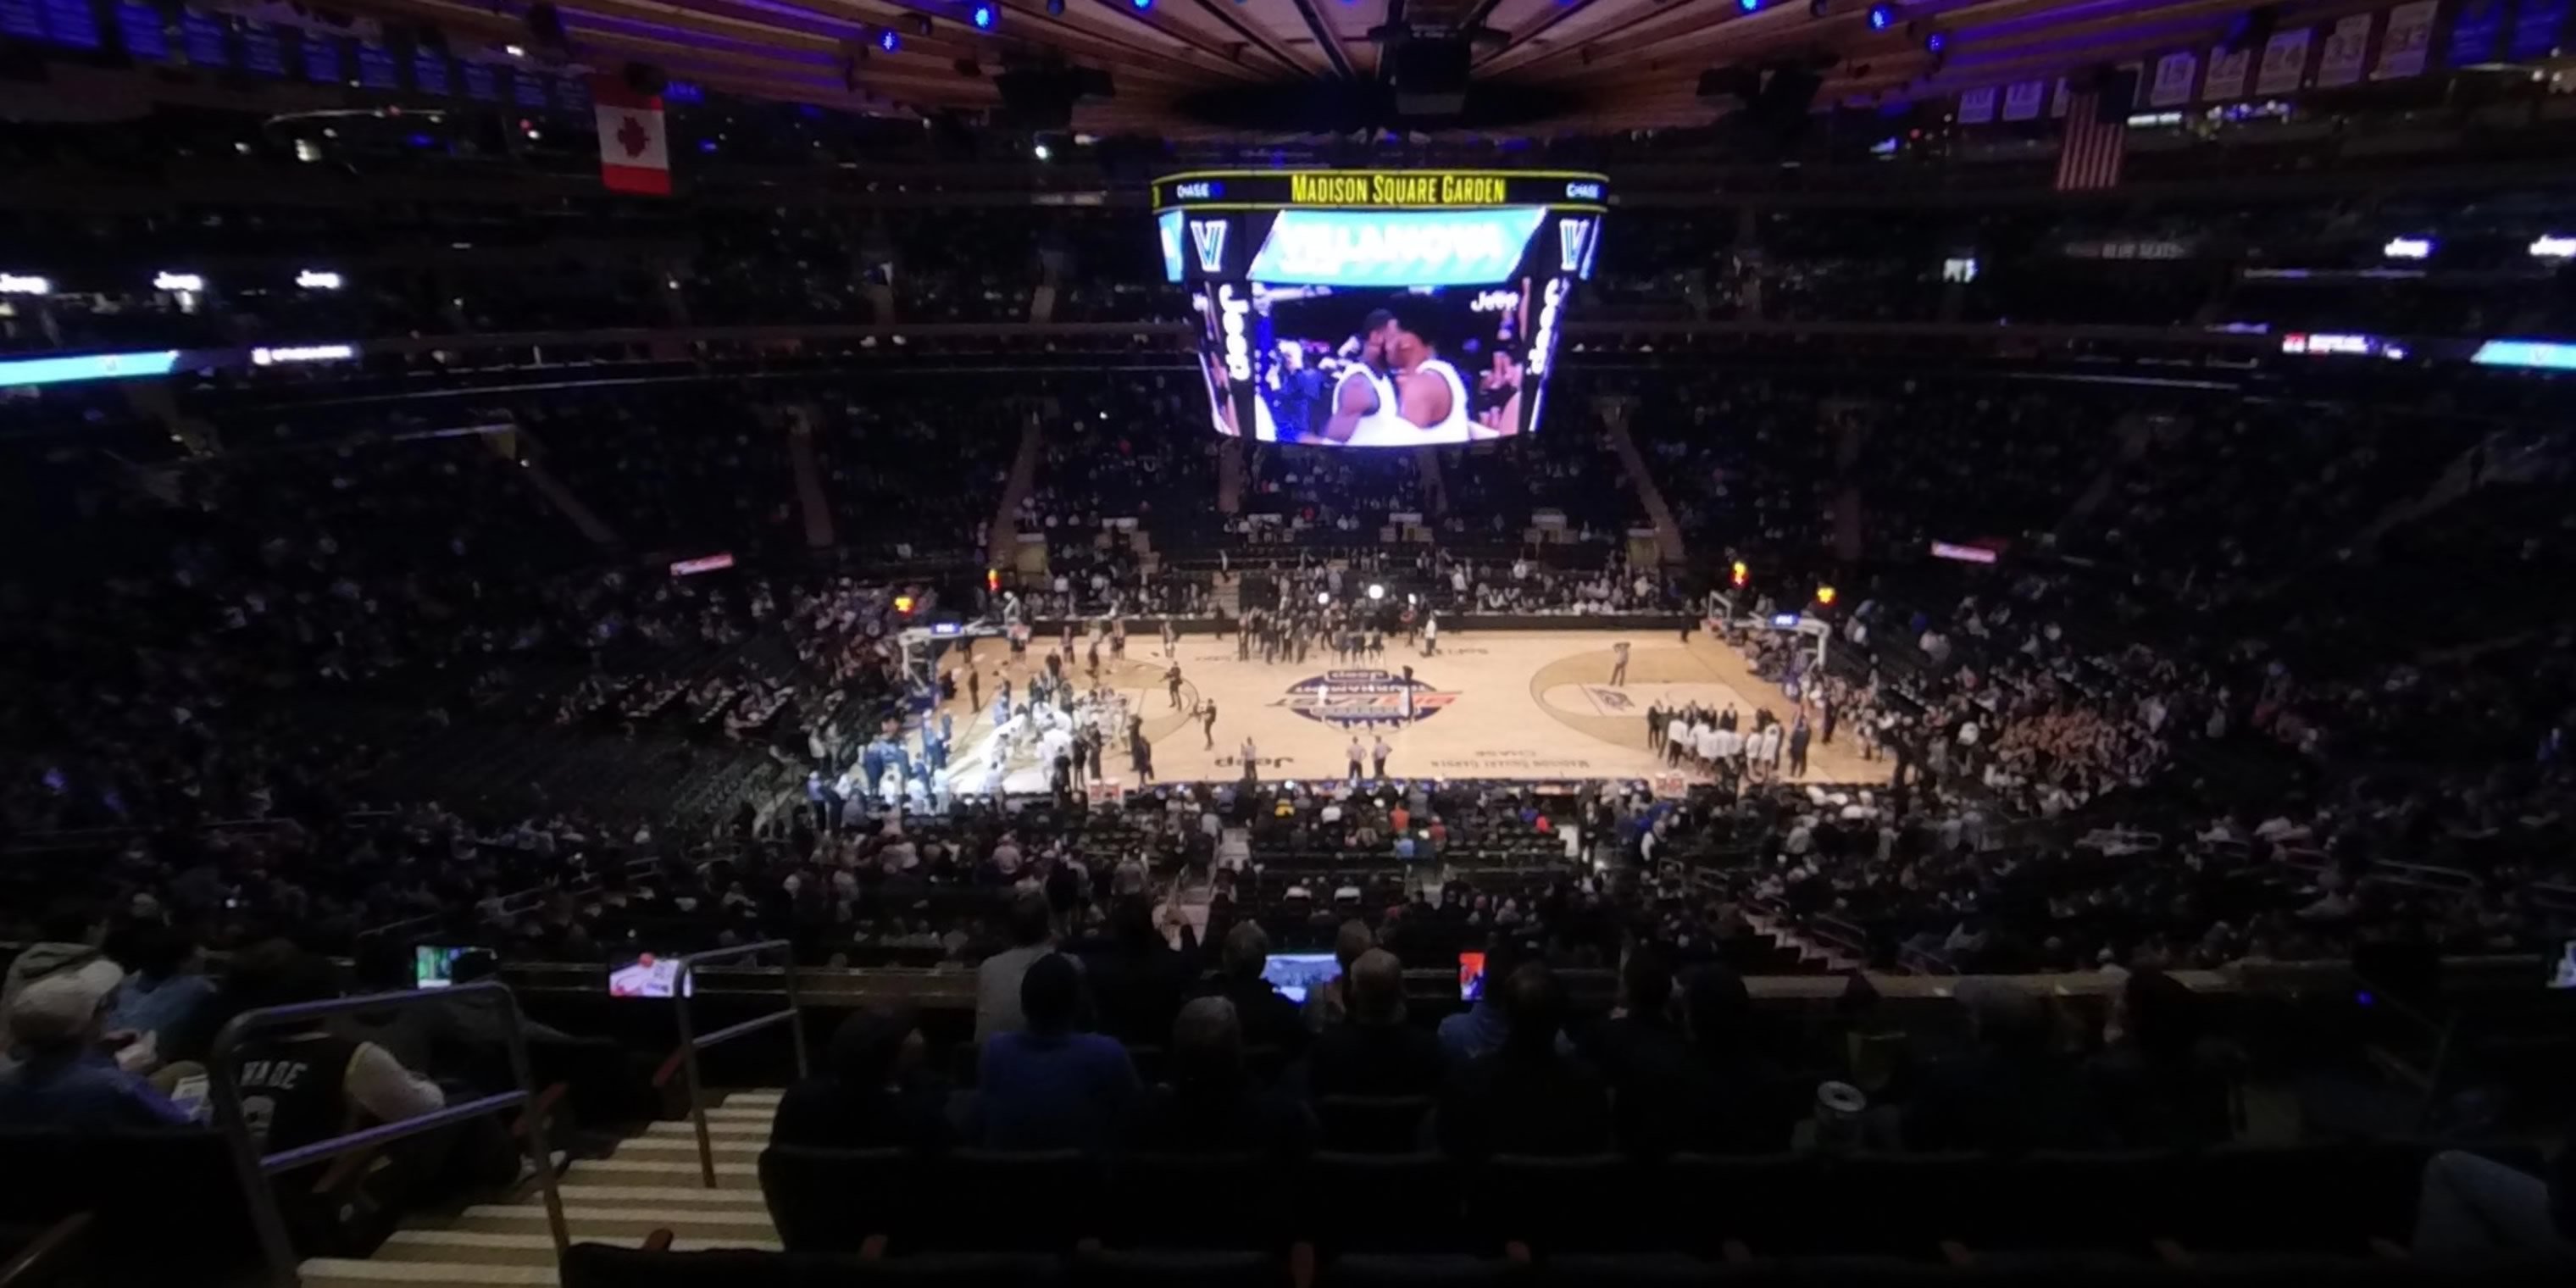 section 211 panoramic seat view  for basketball - madison square garden